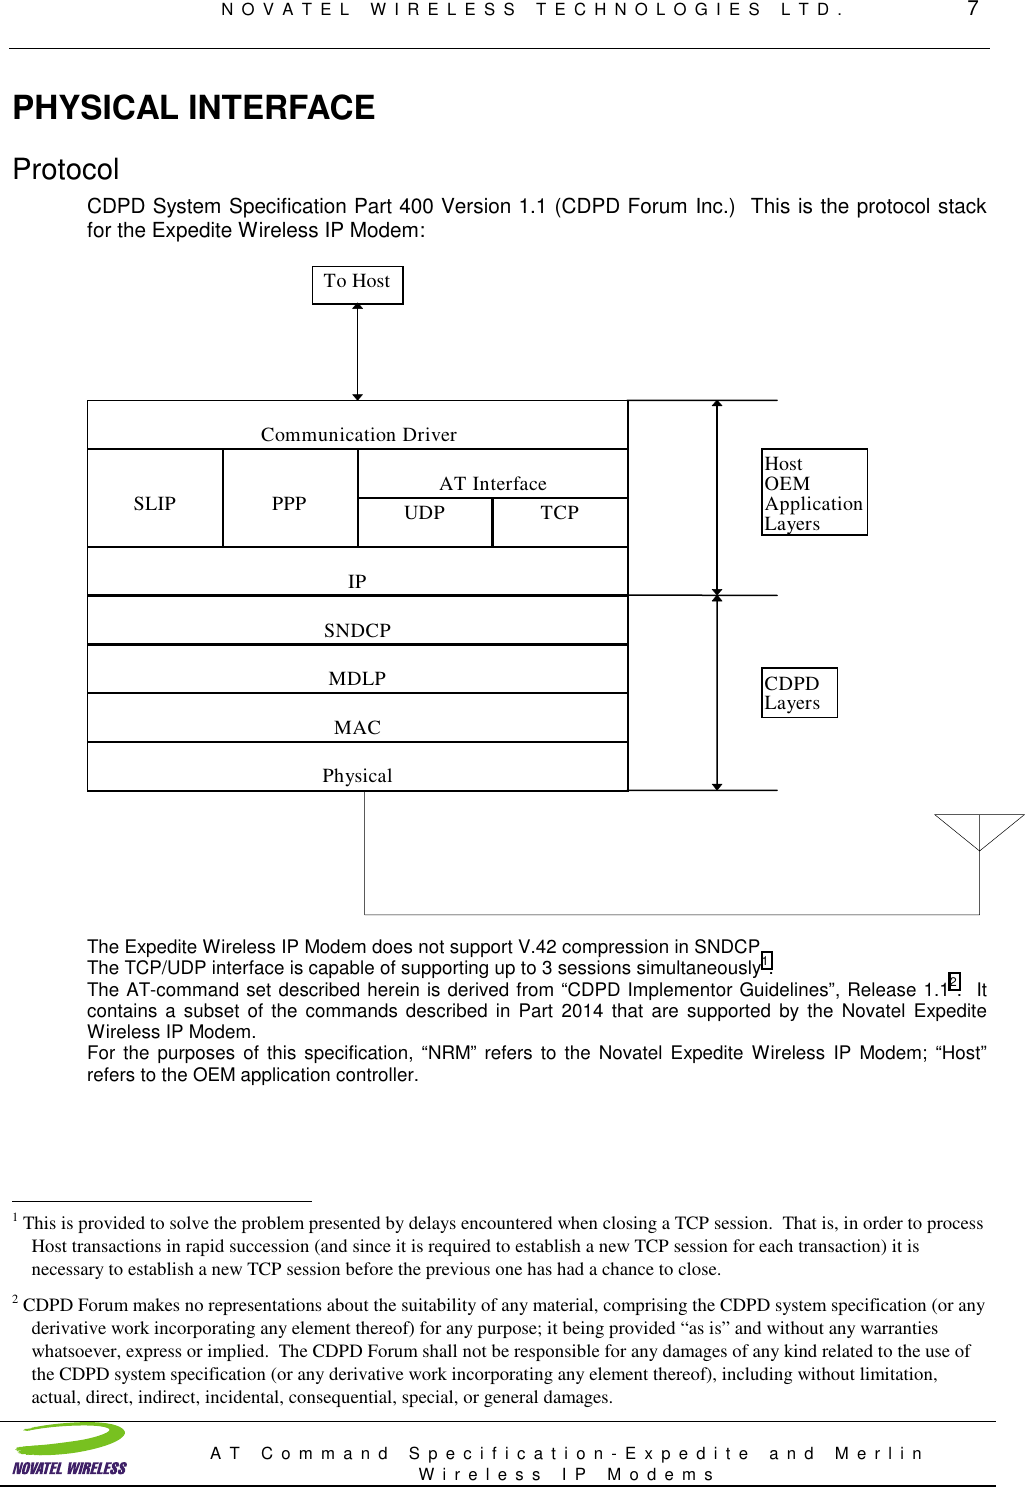 NOVATEL WIRELESS TECHNOLOGIES LTD.         7AT Command Specification-Expedite and MerlinWireless IP ModemsPHYSICAL INTERFACEProtocolCDPD System Specification Part 400 Version 1.1 (CDPD Forum Inc.)  This is the protocol stackfor the Expedite Wireless IP Modem:PhysicalMACMDLPSNDCPIPSLIP PPP UDP TCPAT InterfaceCommunication DriverCDPDLayersHostOEMApplicationLayersTo HostThe Expedite Wireless IP Modem does not support V.42 compression in SNDCP.The TCP/UDP interface is capable of supporting up to 3 sessions simultaneously1.The AT-command set described herein is derived from “CDPD Implementor Guidelines”, Release 1.12.  Itcontains a subset of the commands described in Part 2014 that are supported by the Novatel ExpediteWireless IP Modem.For the purposes of this specification, “NRM” refers to the Novatel Expedite Wireless IP Modem; “Host”refers to the OEM application controller.                                                          1 This is provided to solve the problem presented by delays encountered when closing a TCP session.  That is, in order to processHost transactions in rapid succession (and since it is required to establish a new TCP session for each transaction) it isnecessary to establish a new TCP session before the previous one has had a chance to close.2 CDPD Forum makes no representations about the suitability of any material, comprising the CDPD system specification (or anyderivative work incorporating any element thereof) for any purpose; it being provided “as is” and without any warrantieswhatsoever, express or implied.  The CDPD Forum shall not be responsible for any damages of any kind related to the use ofthe CDPD system specification (or any derivative work incorporating any element thereof), including without limitation,actual, direct, indirect, incidental, consequential, special, or general damages.